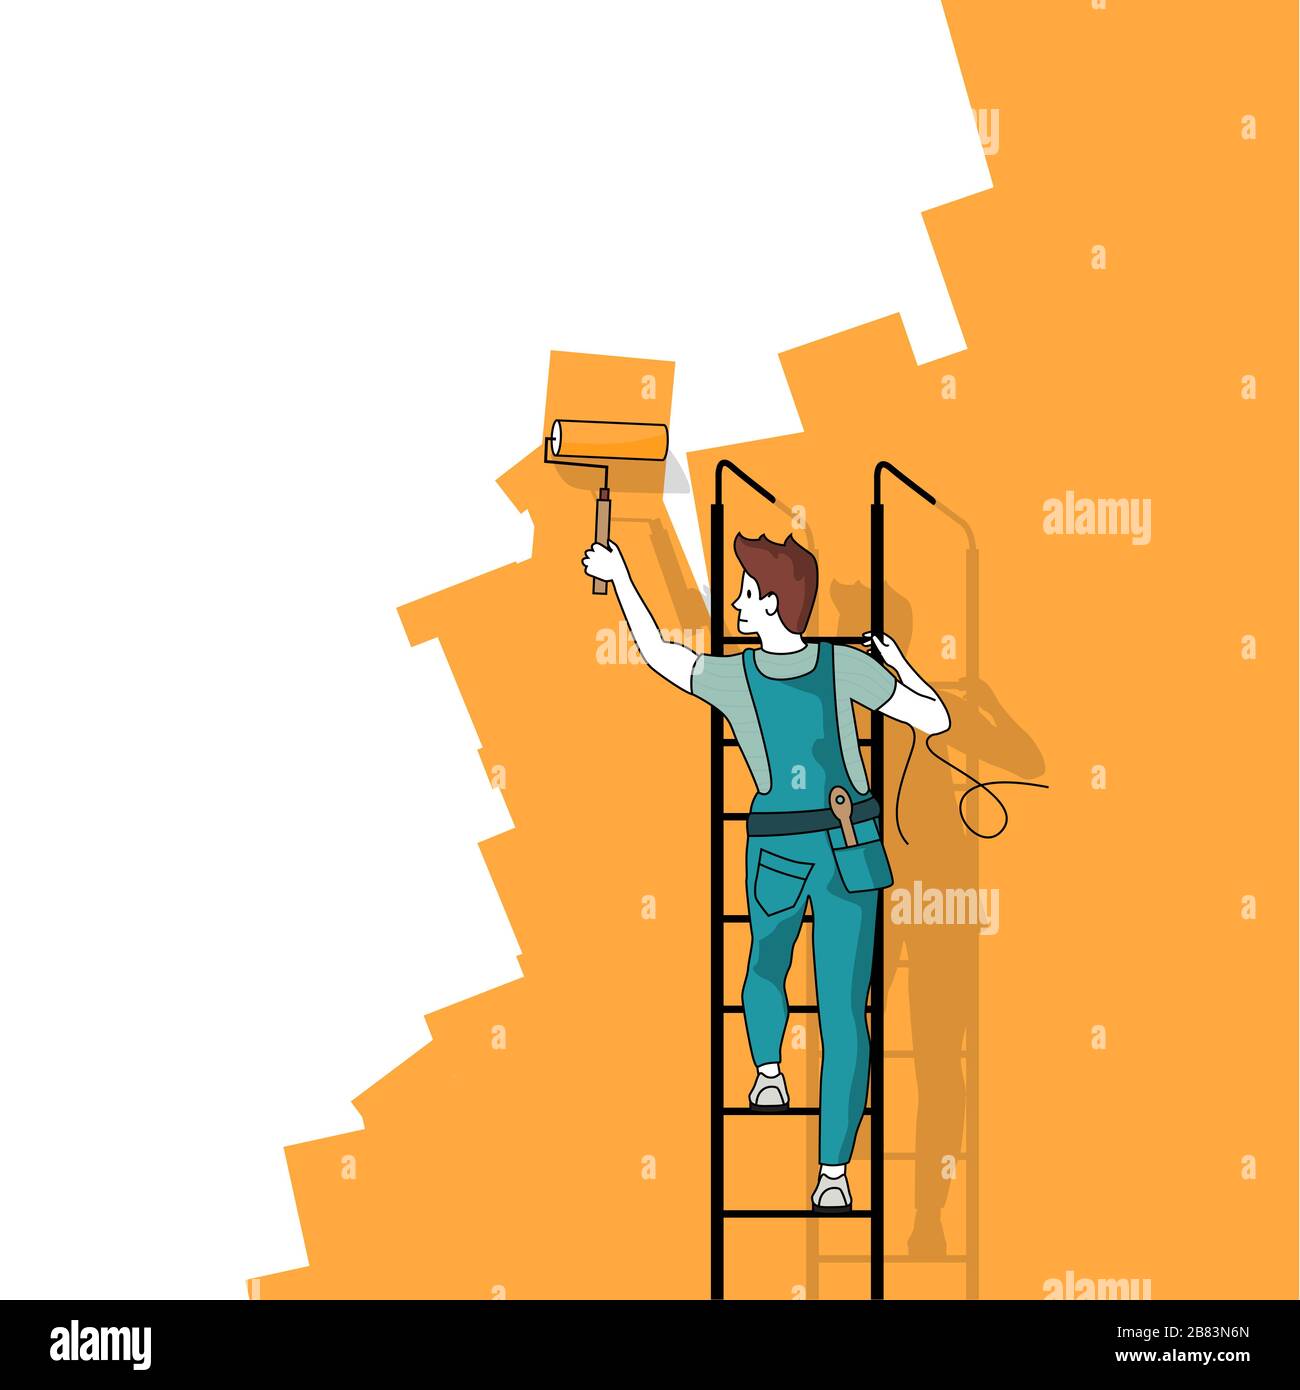 A man on a ladder painting a wall a different colour. People concept vector illustrastion. Stock Vector